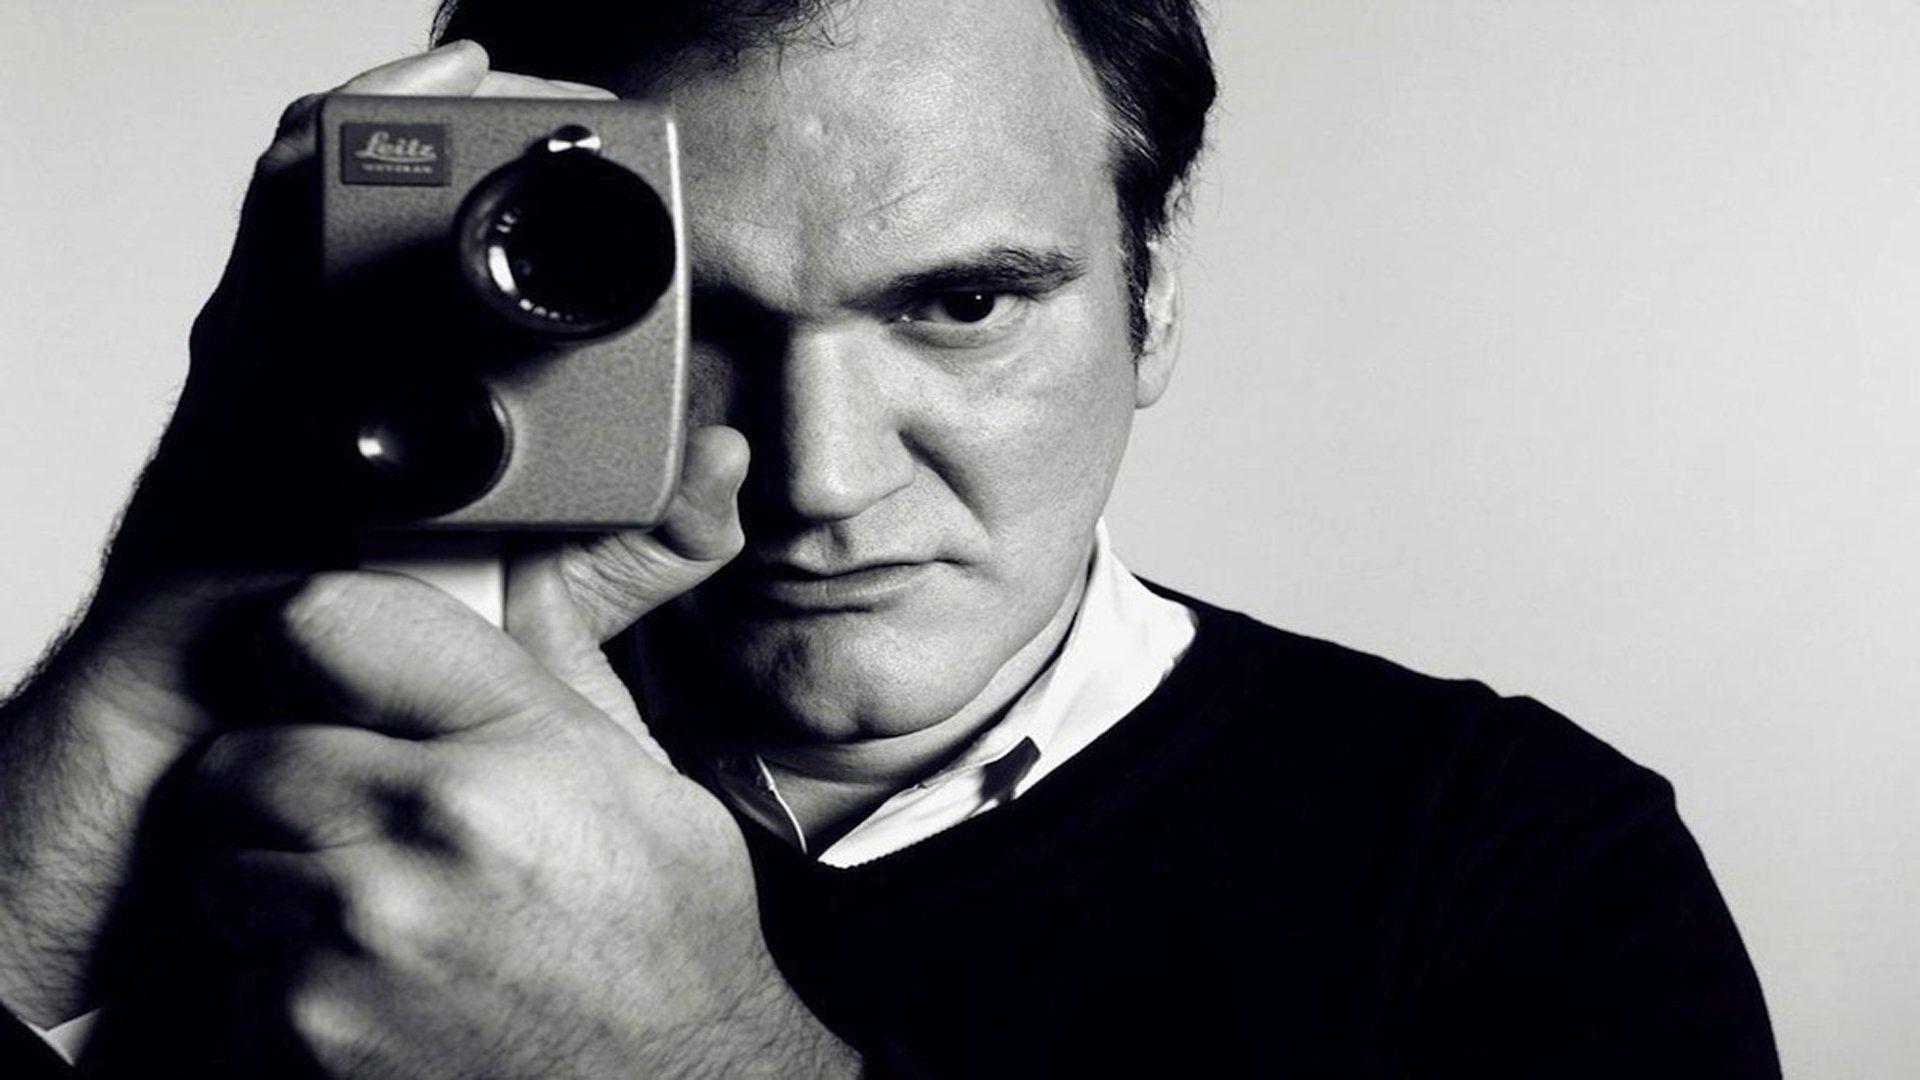 Quentin Tarantino Is Making A Movie About The Manson Murders